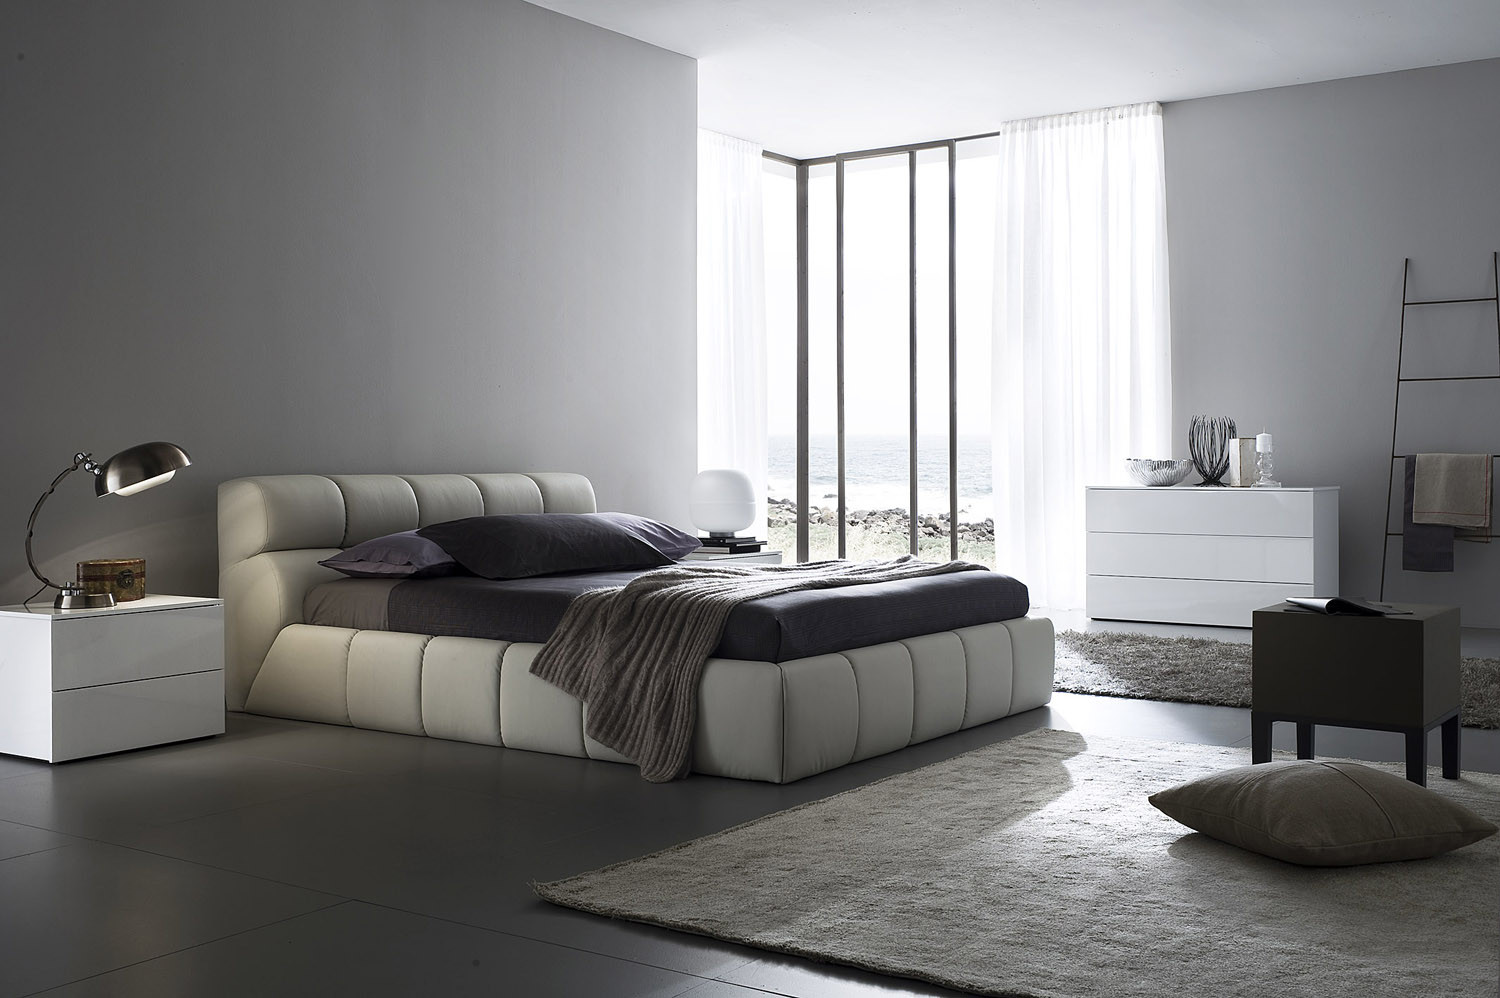 Modern Chic Bedroom
 Bedroom Decorating Ideas from Evinco